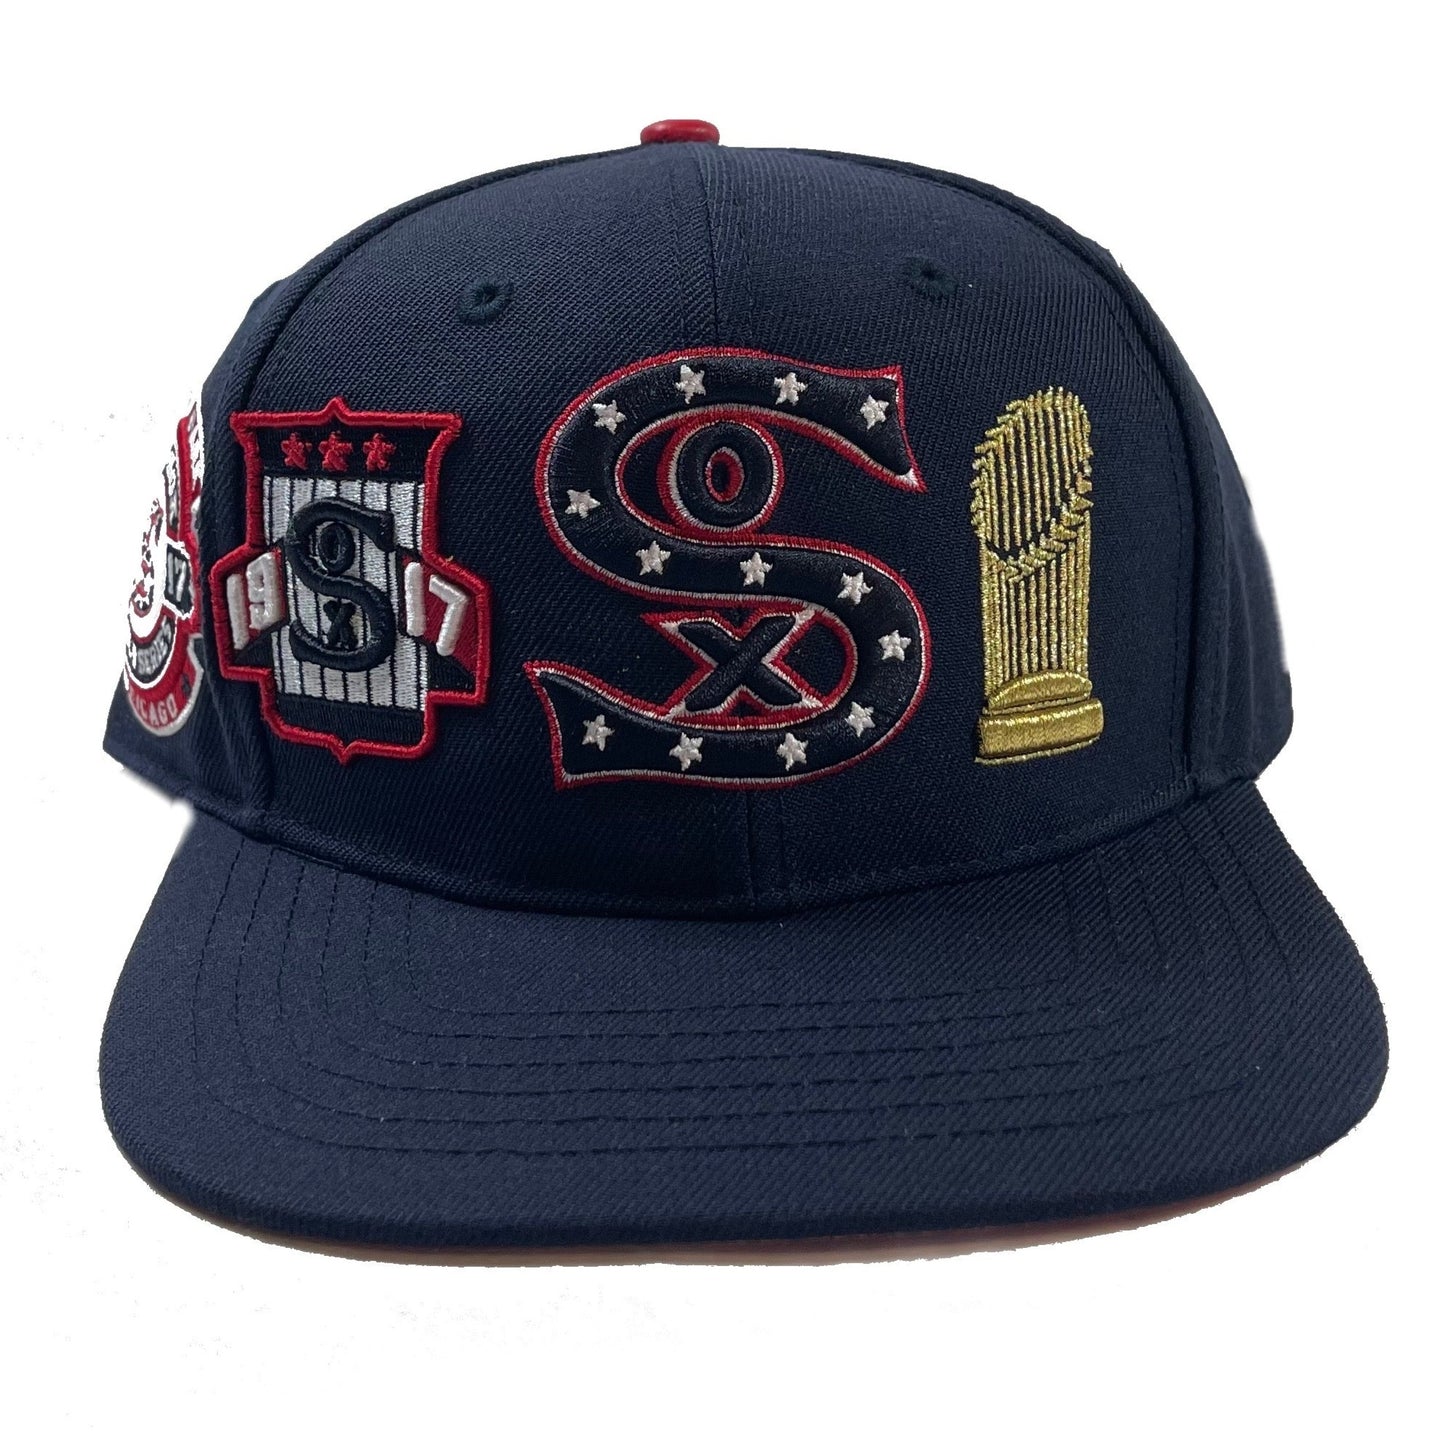 Chicago White Sox Patches (Navy) Snapback